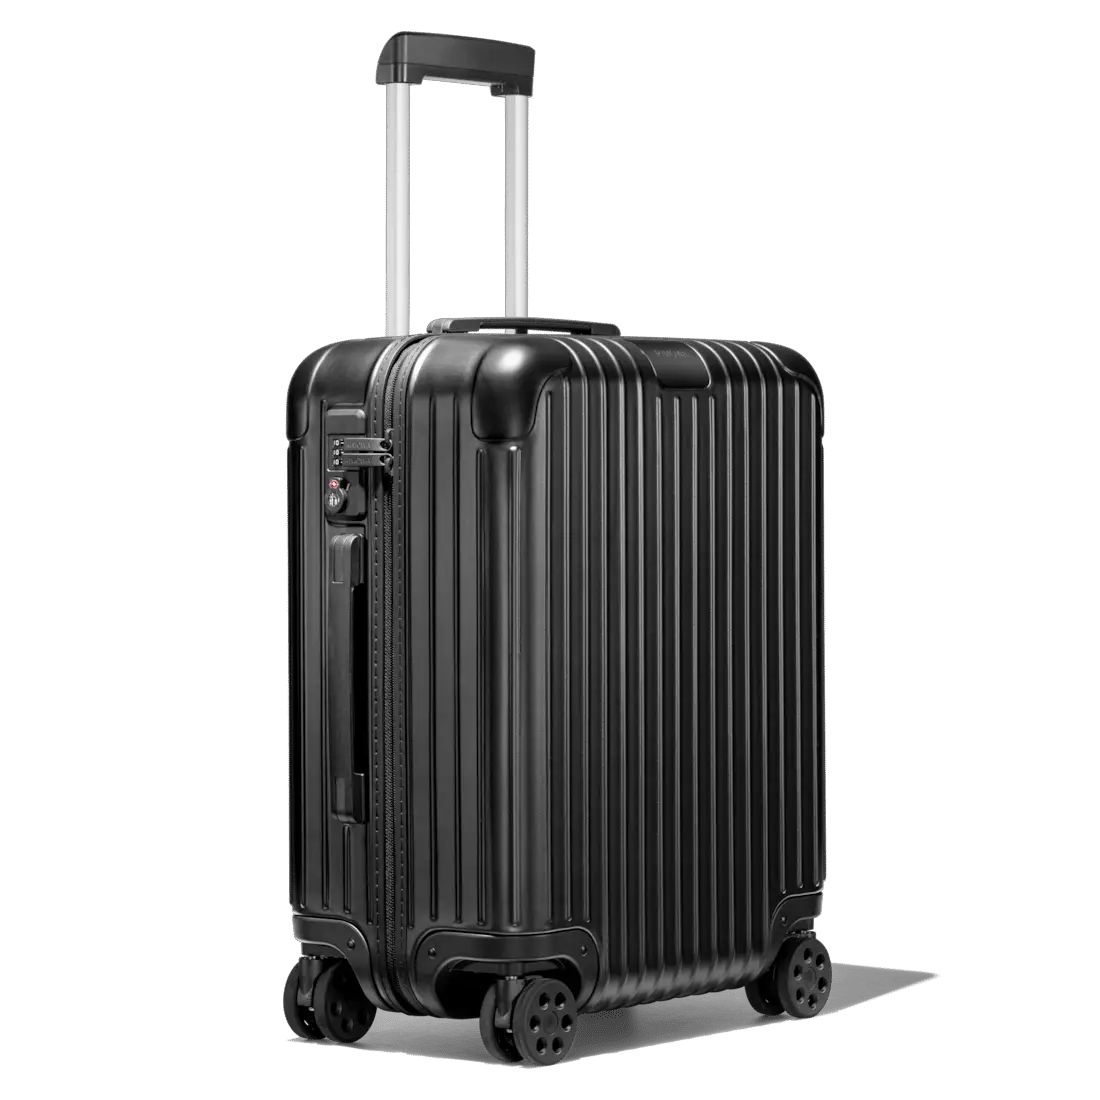 Rimowa Cabin Plus Carry-On – Is the Upgrade Worth It?